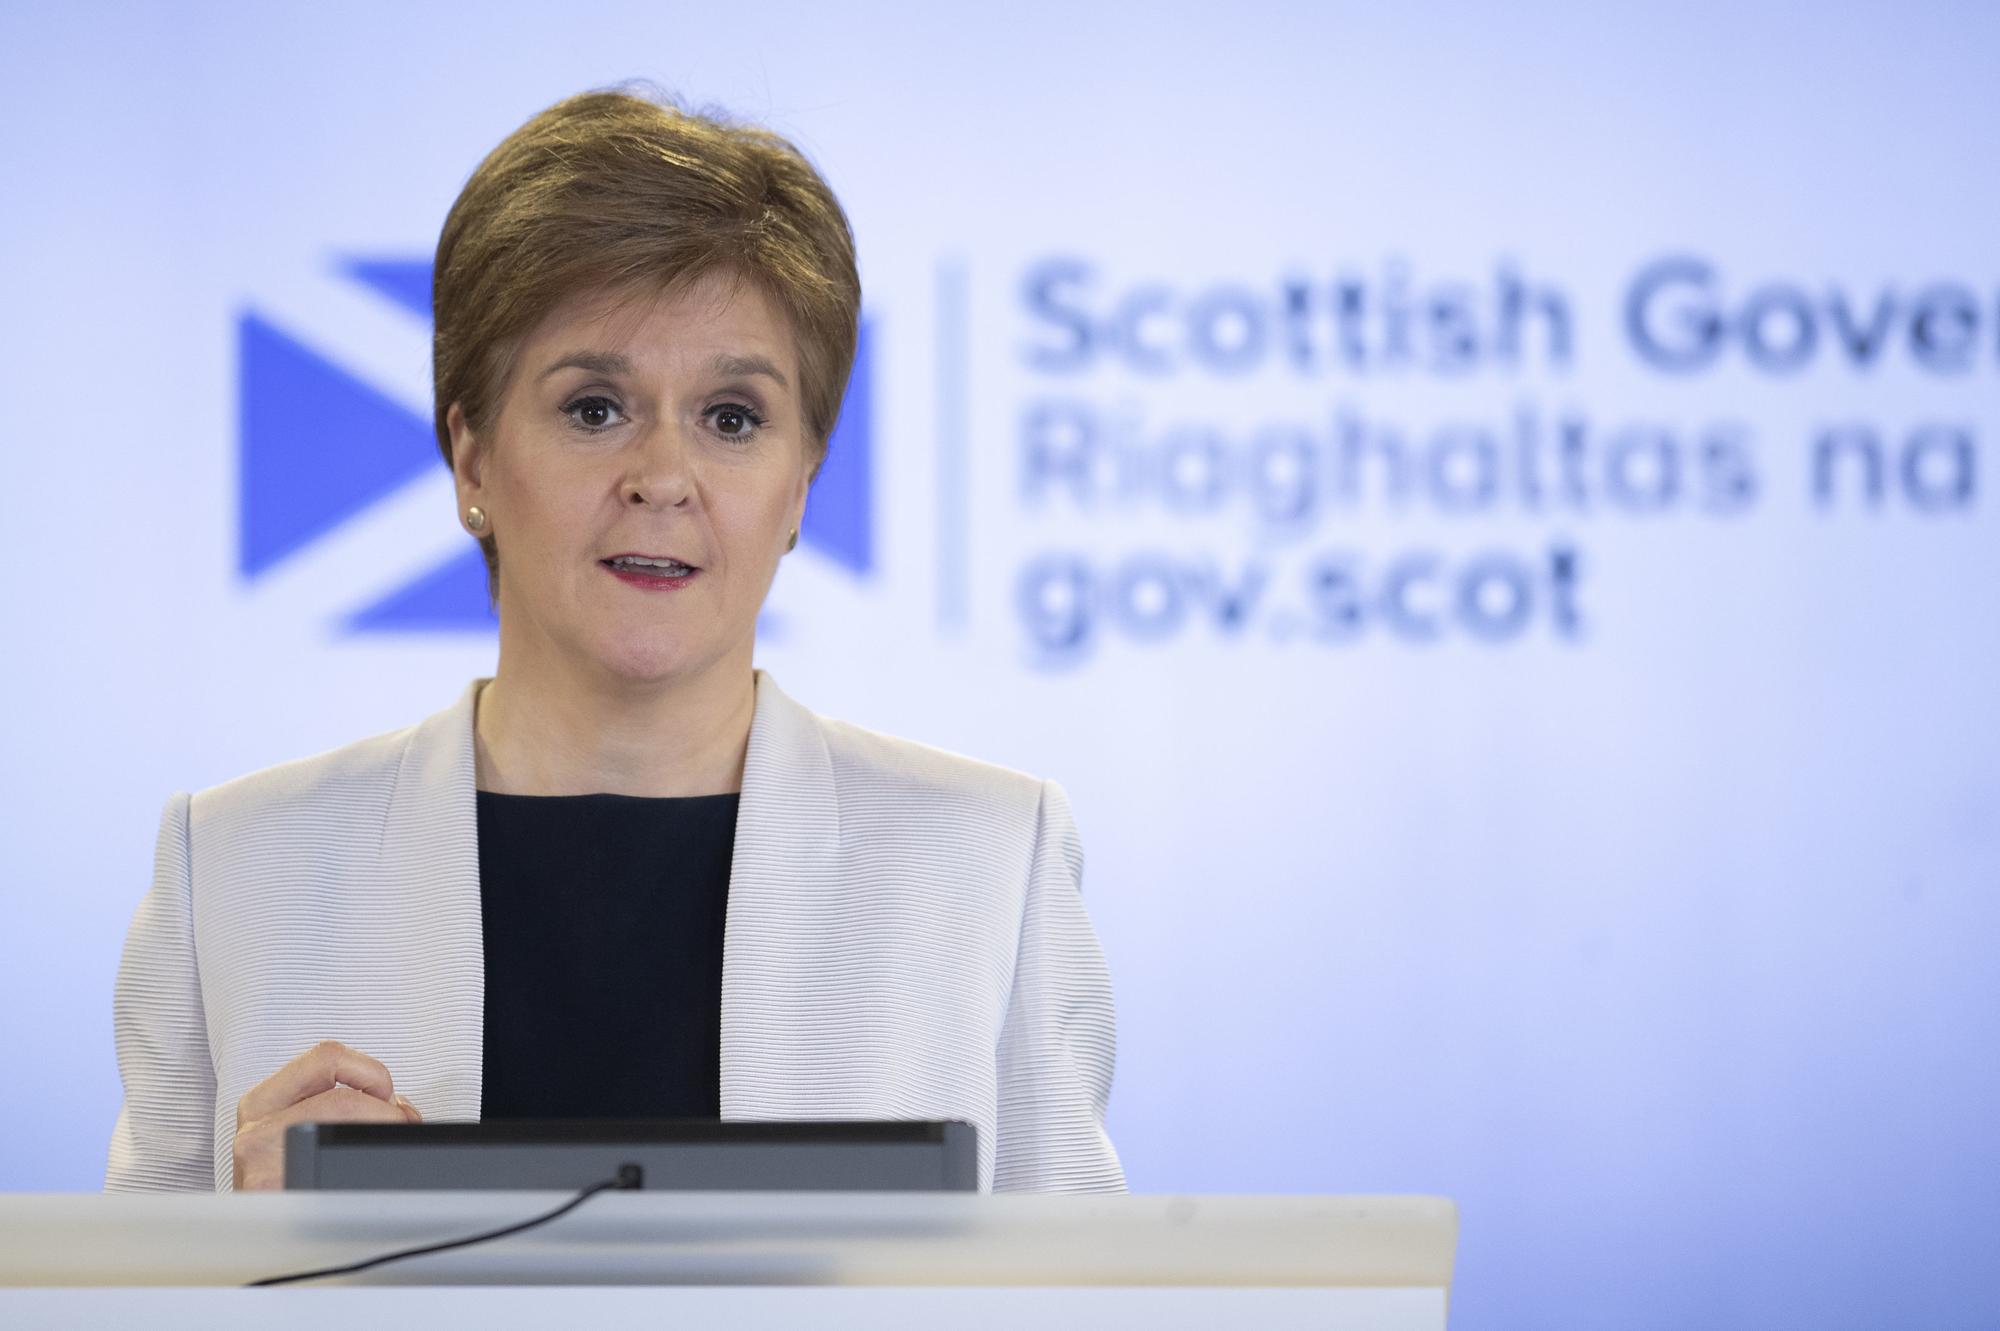 nicola sturgeon’s reckoning with eternal shame is now only a question of when - brian monteith